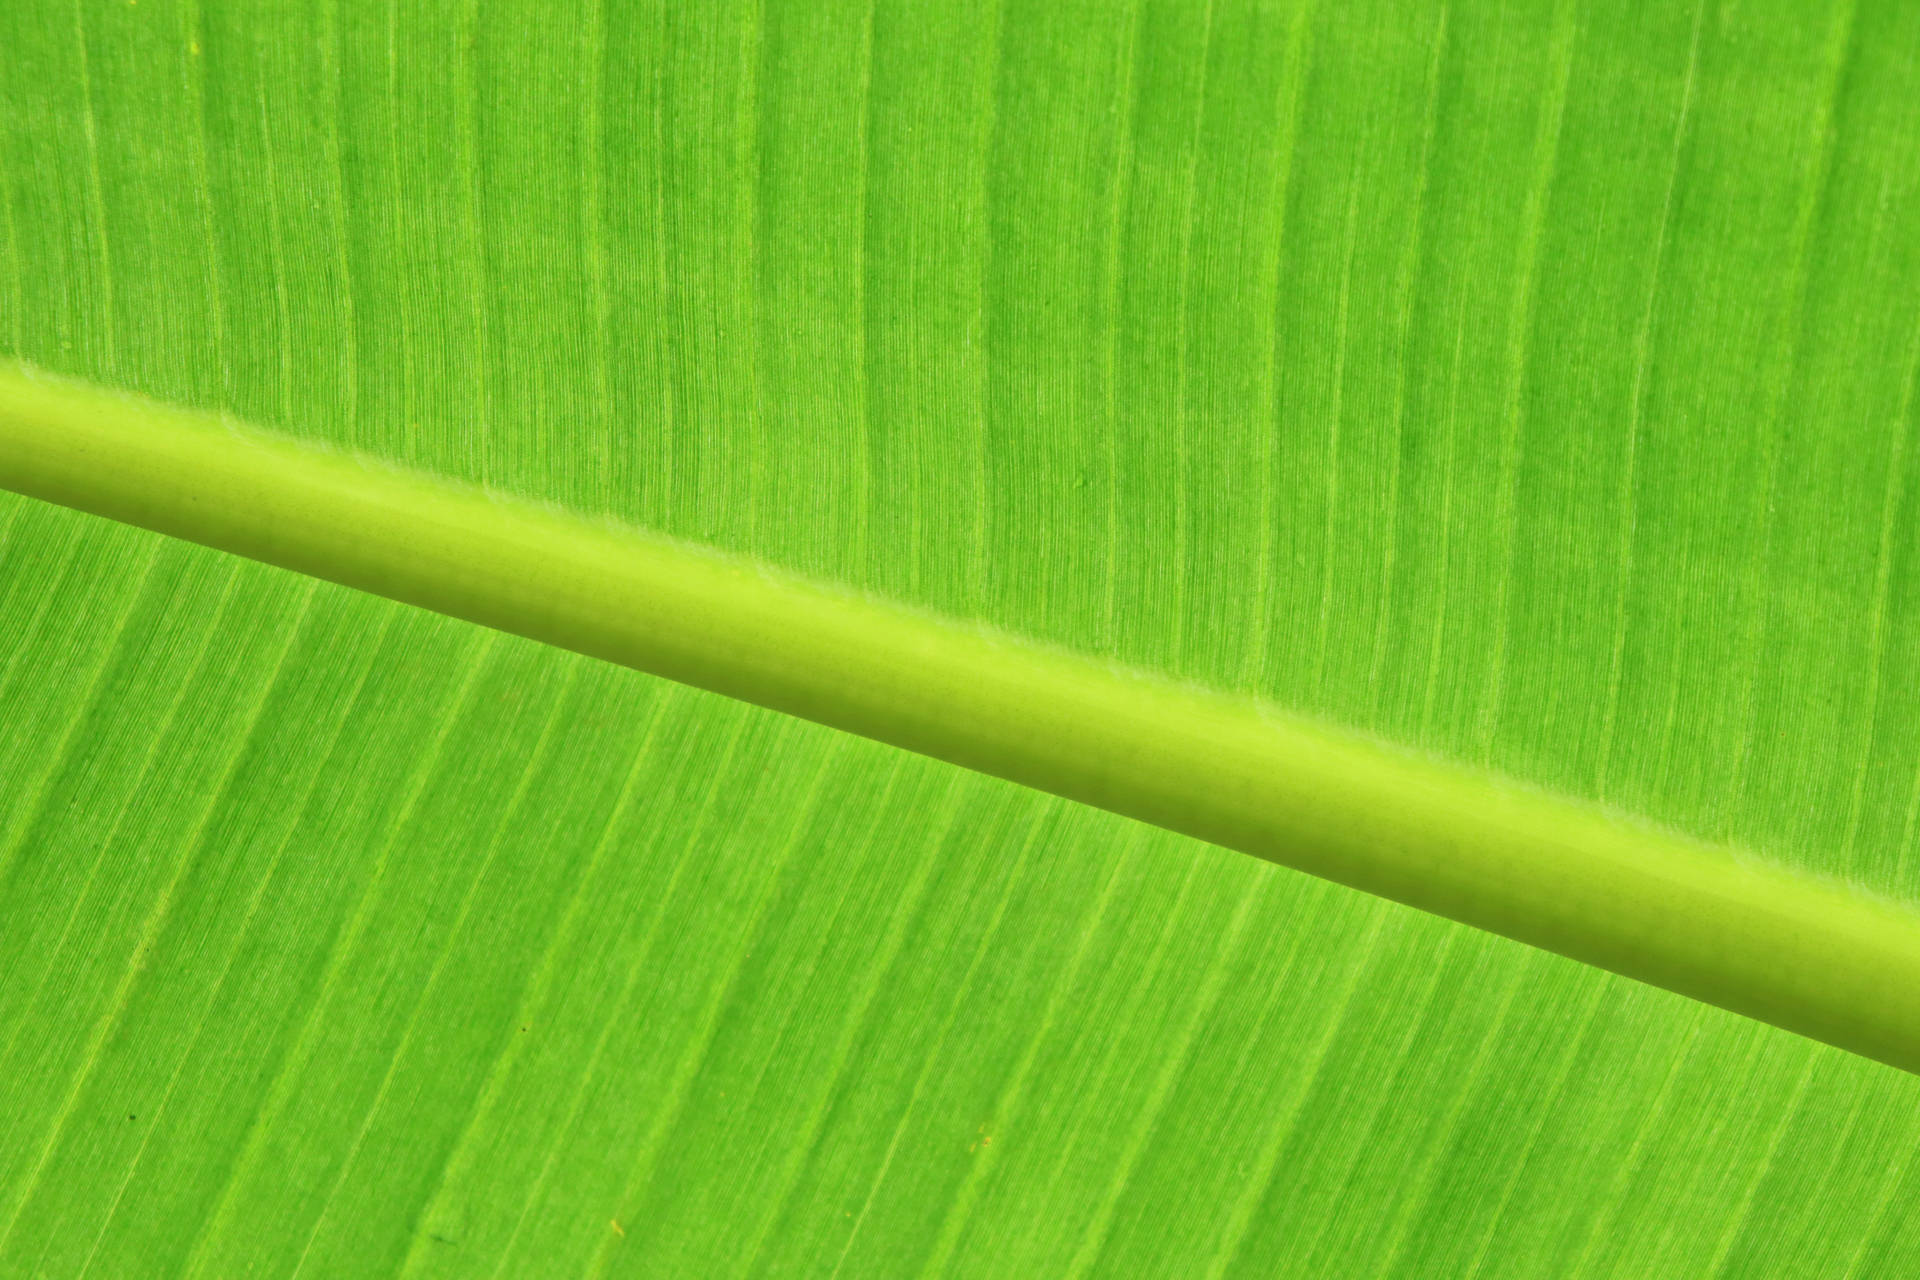 Banana Leaf 6000X4000 Wallpaper and Background Image